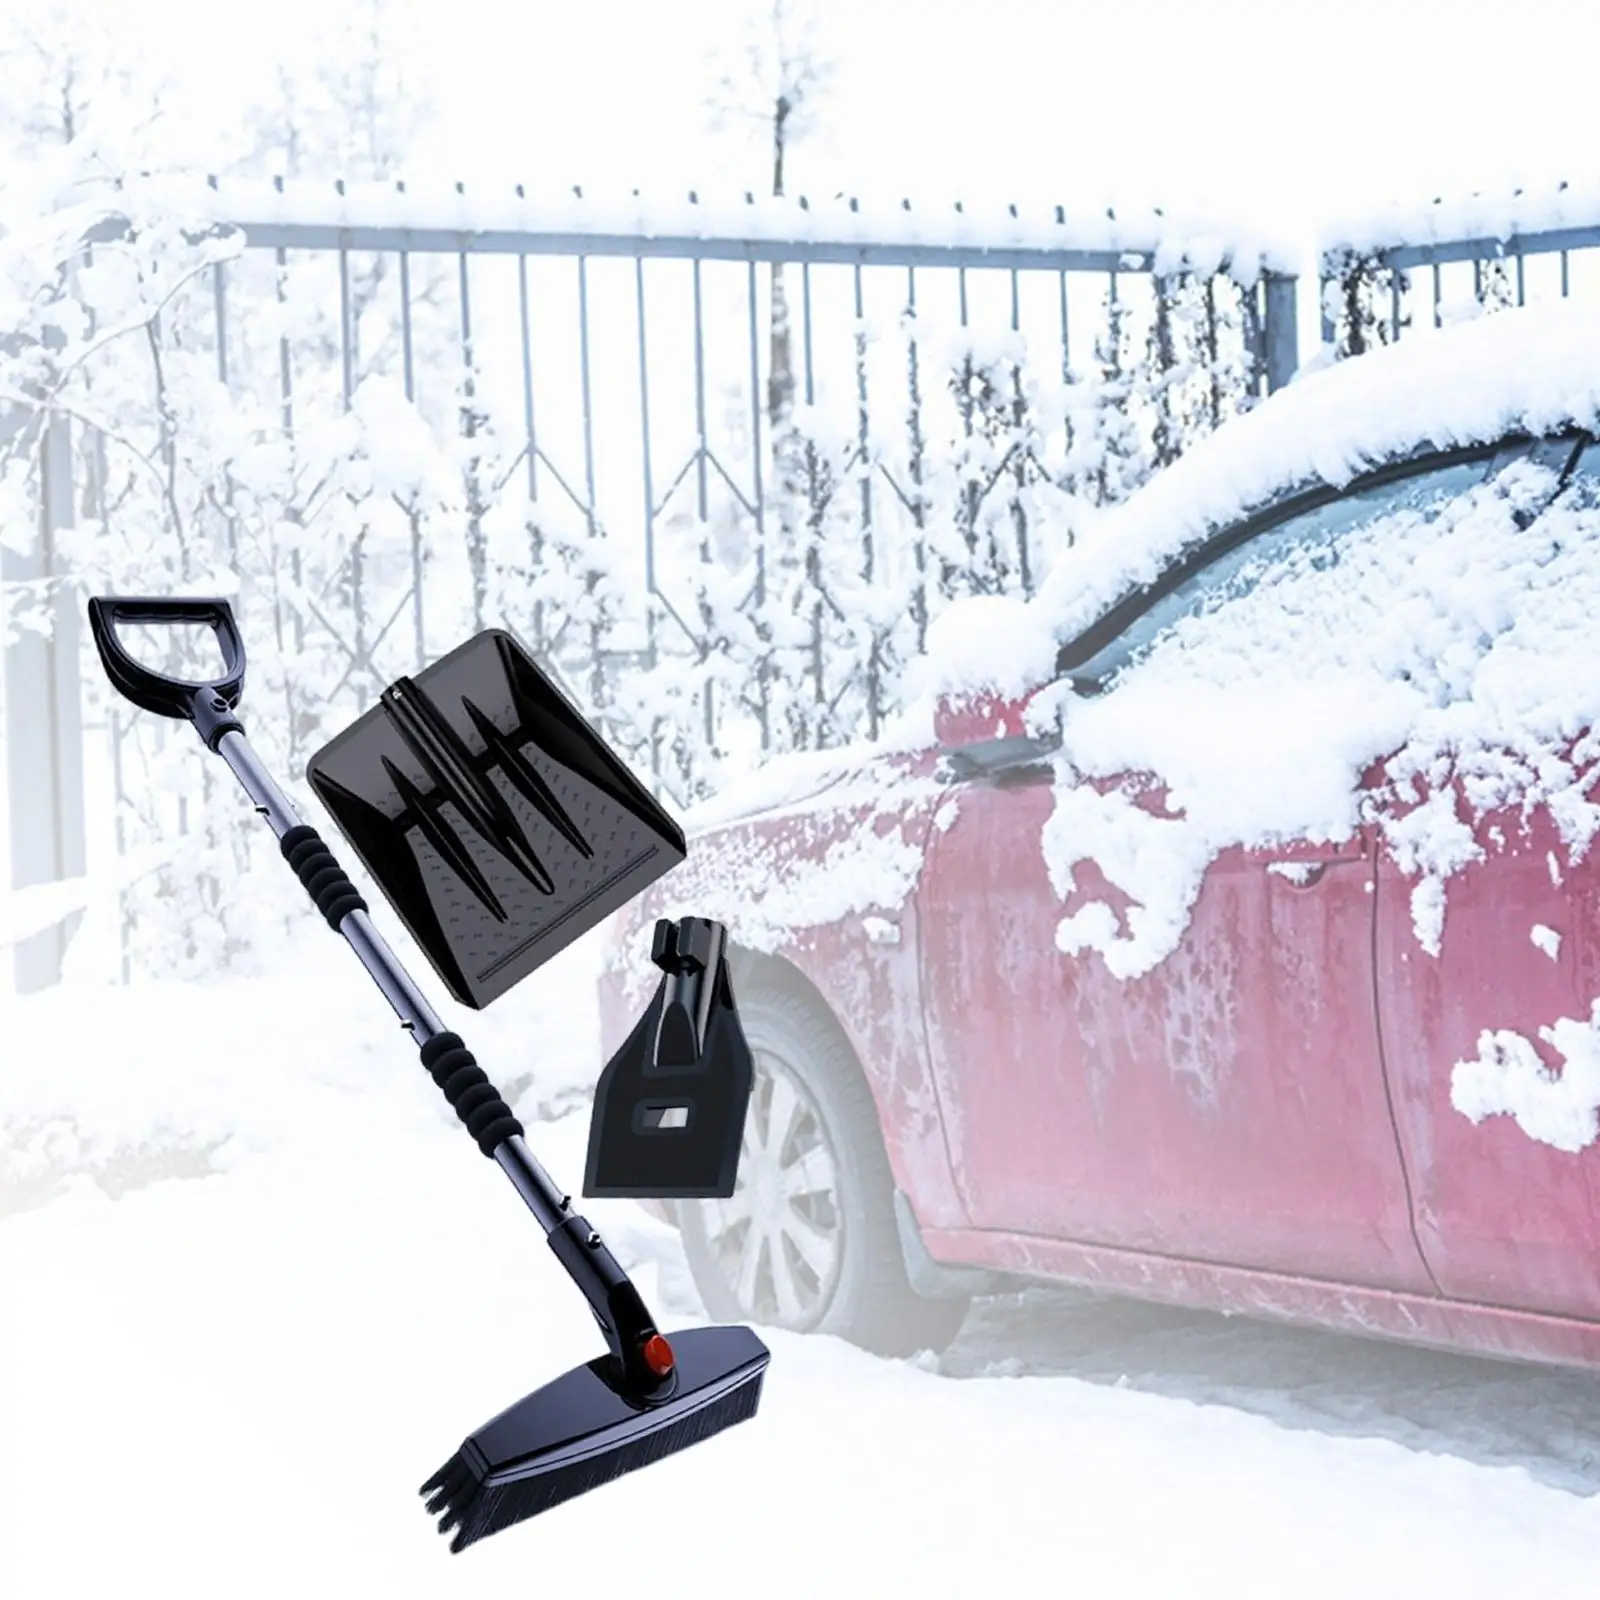 Portable Snow Removal Tool car Window Snow Cleaner Stainless Steel Handle 360 Rotatable Head for Truck Car Vehicles Auto